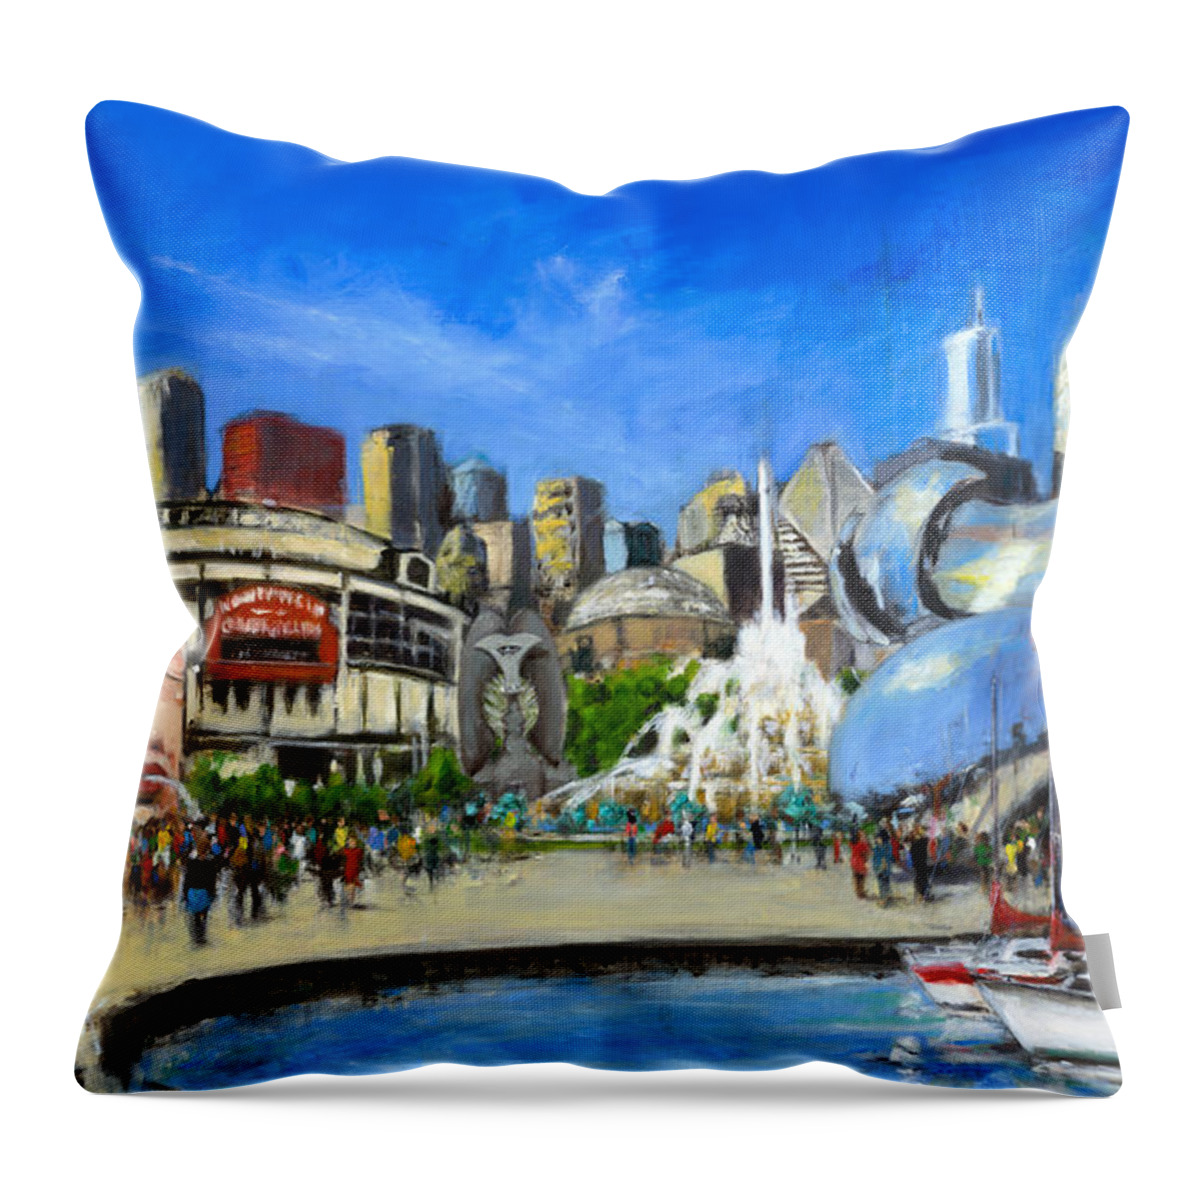 Robert Throw Pillow featuring the painting Impressions of Chicago by Robert Reeves